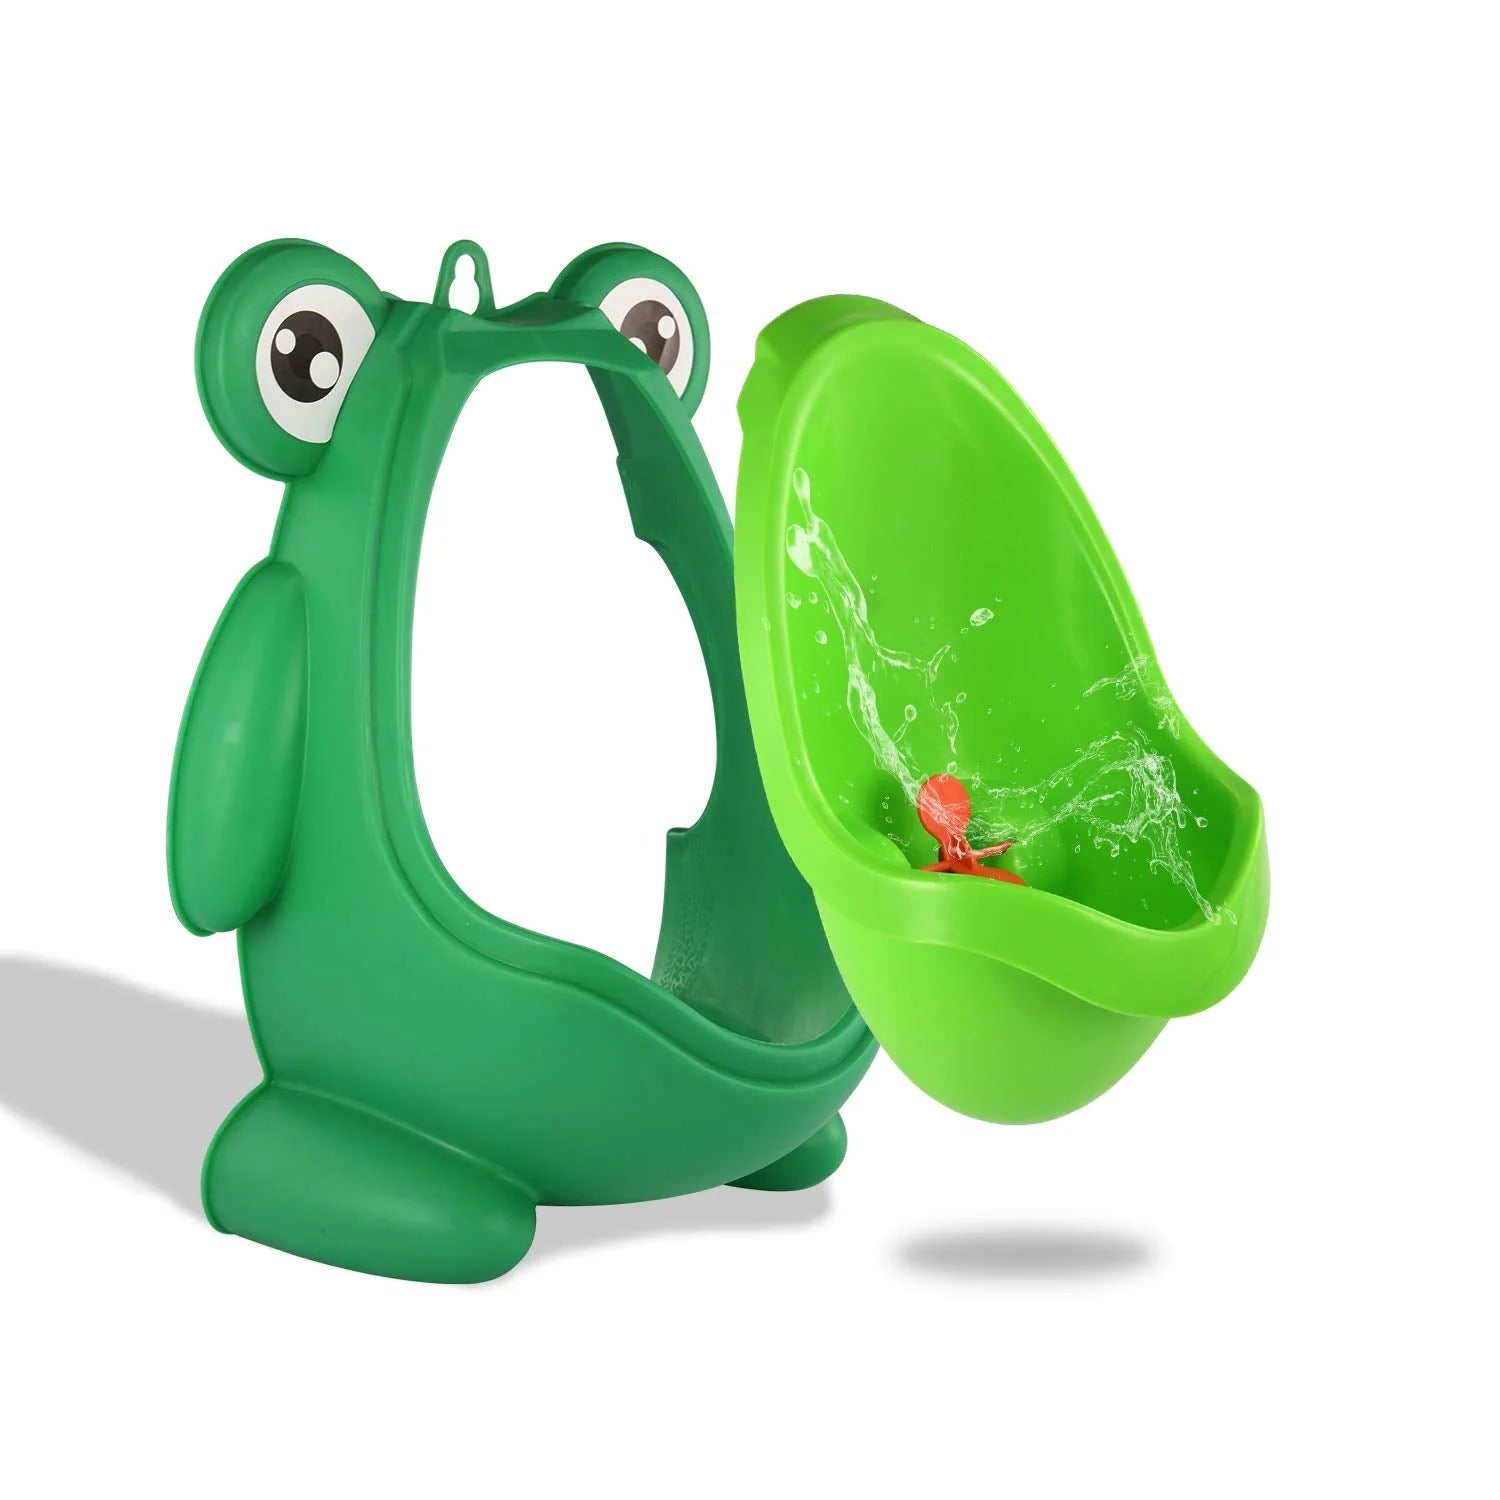 CUTE FROG STANDING TRAINING URINAL FOR BOYS (KIDS)